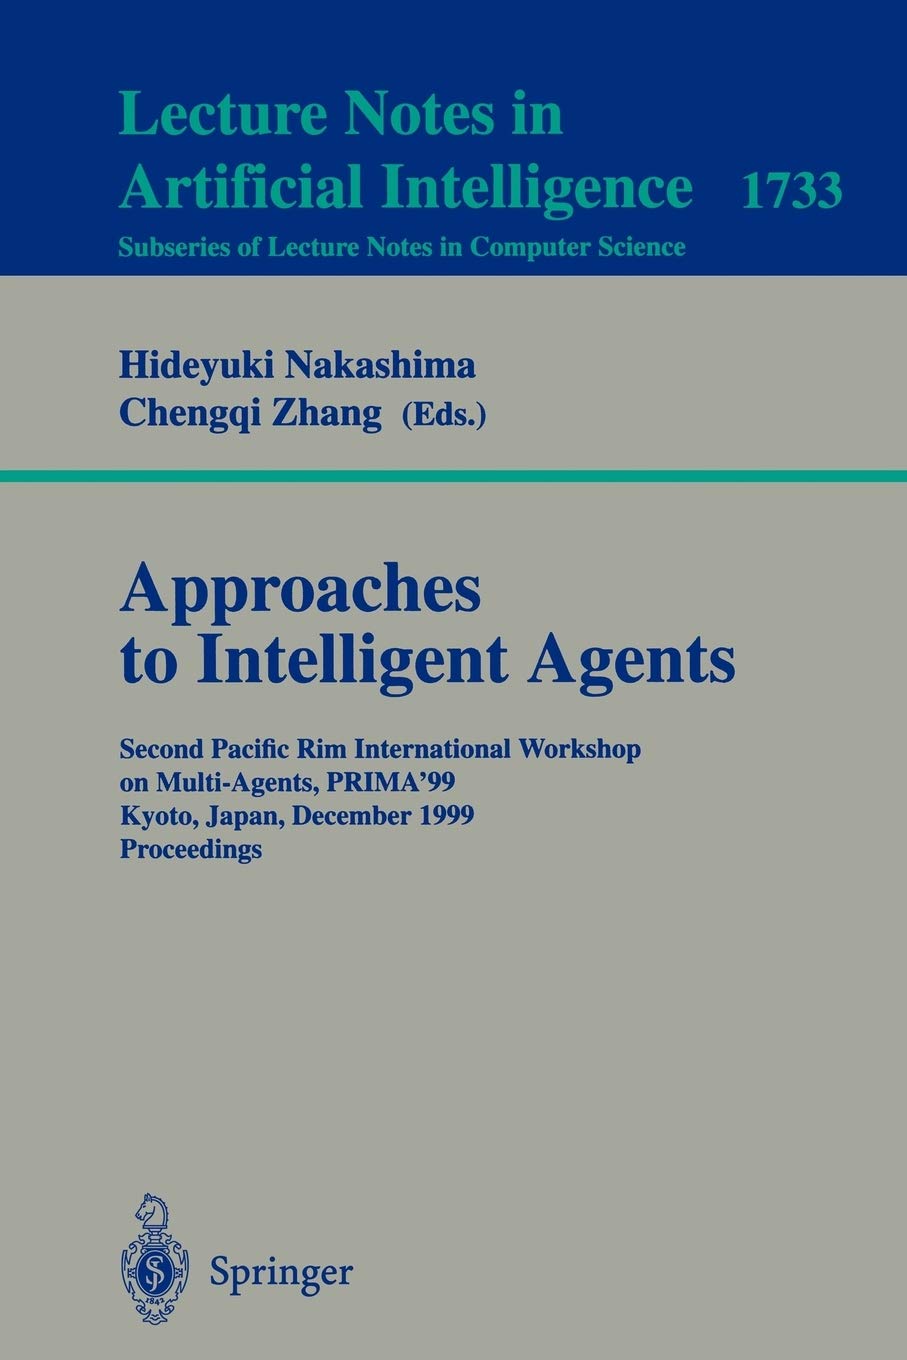 Approaches to Intelligent Agents: Second Pacific Rim International Workshop on Multi-Agents, PRIMA'99, Kyoto, Japan, December 2-3, 1999 Proceed...